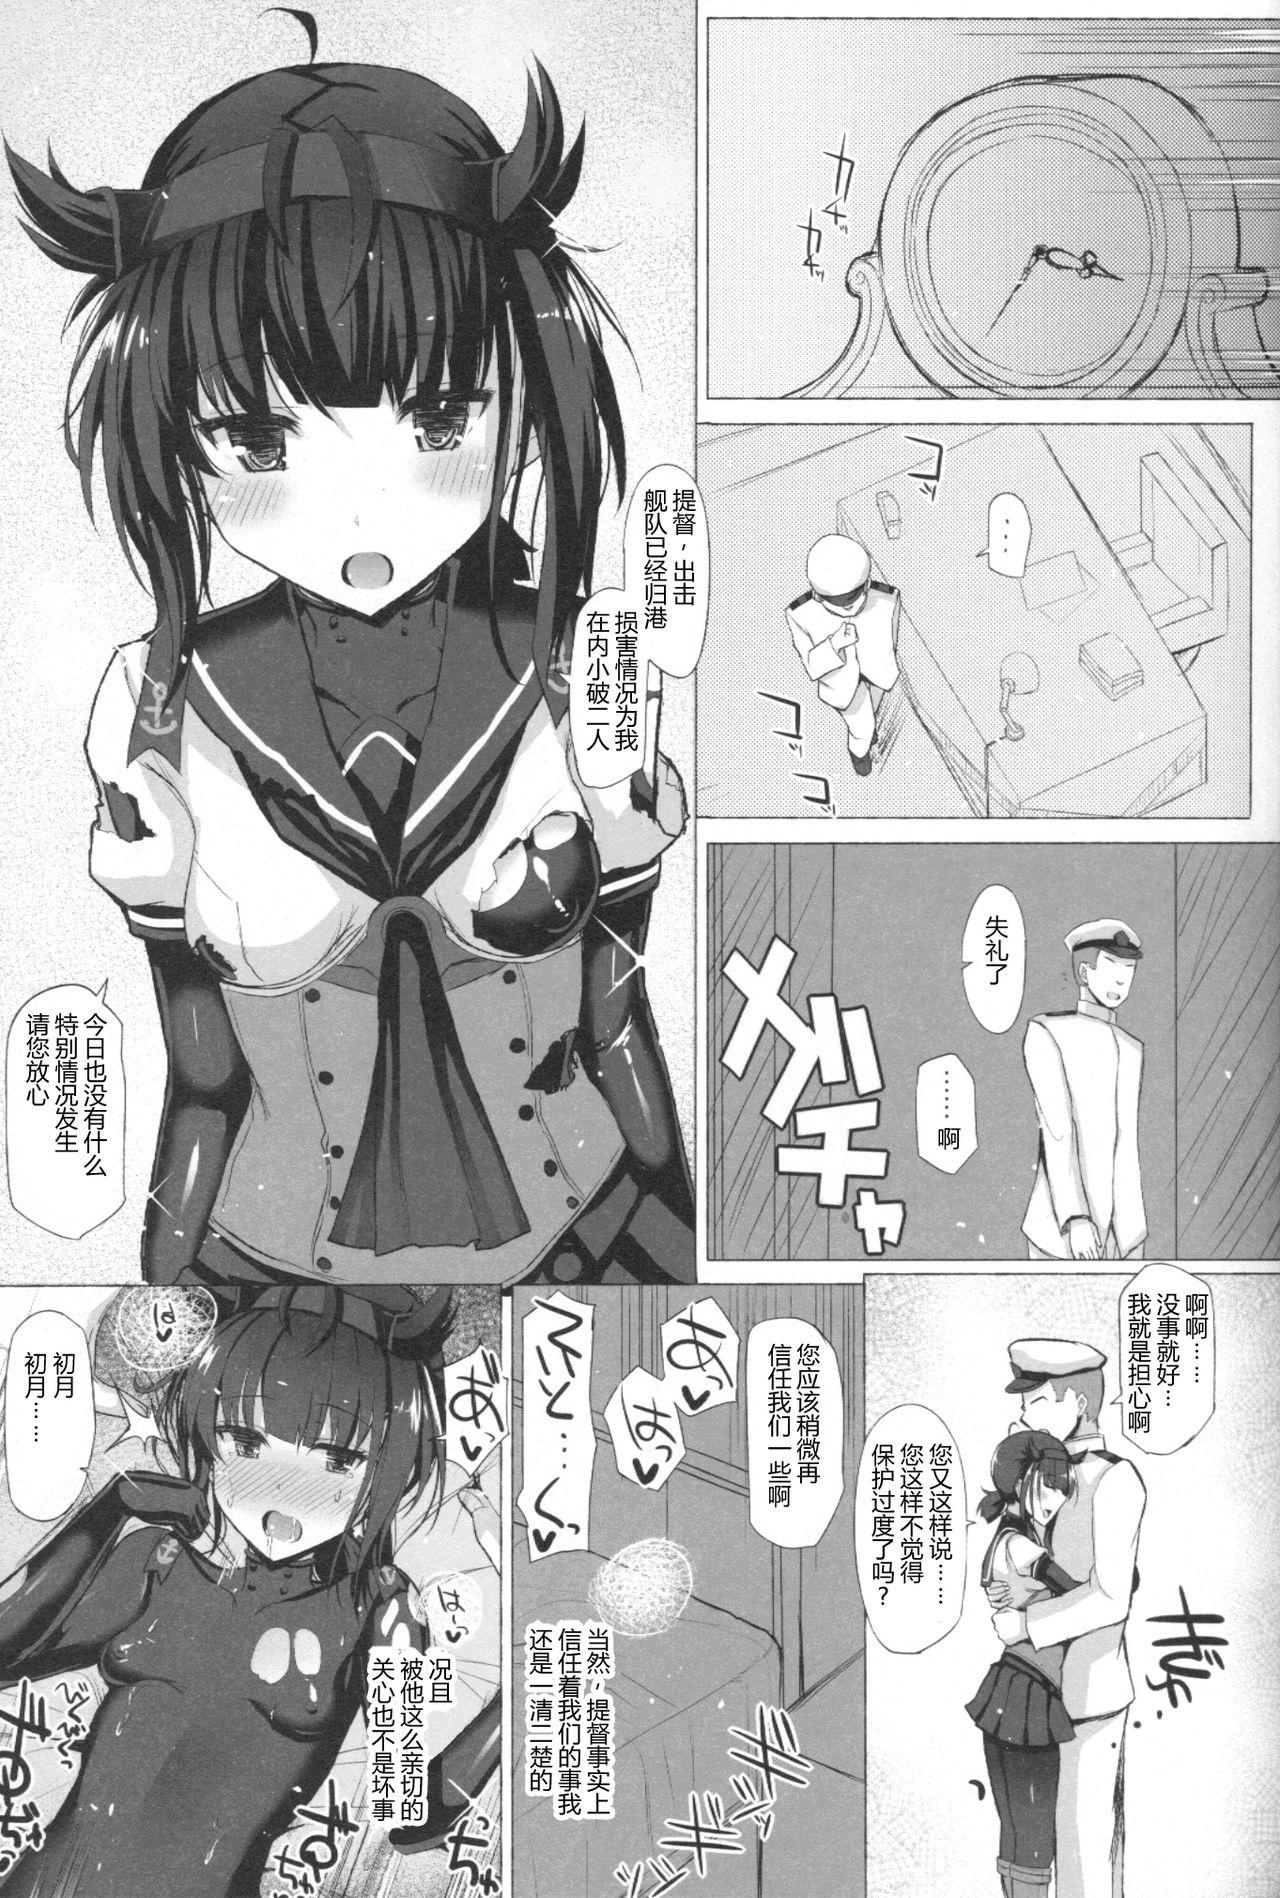 Hot Girl Fucking LOVE IS THE DRUG - Kantai collection Colombiana - Page 2